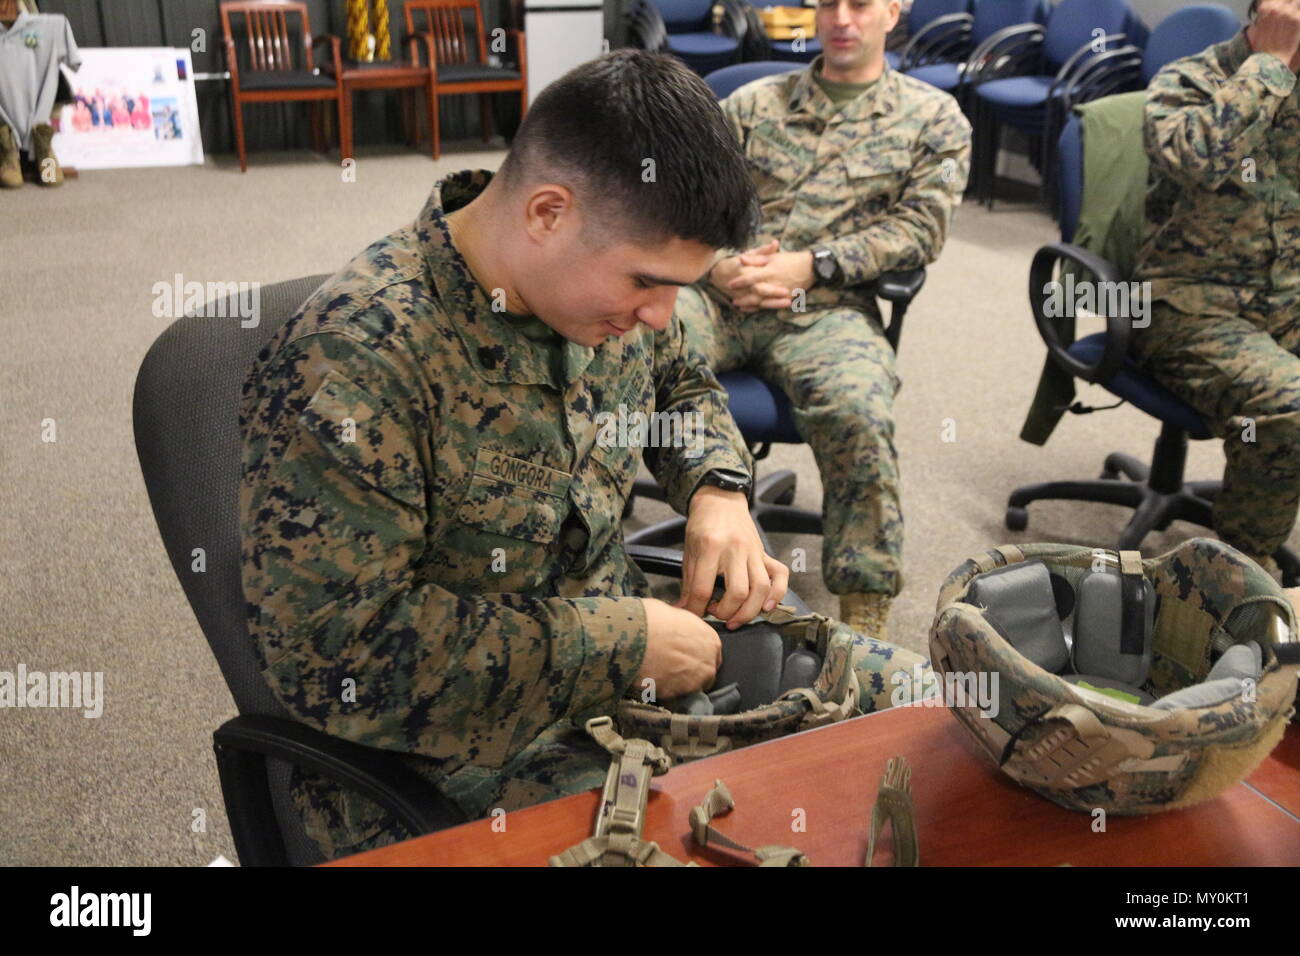 Staff Sgt. Aldo Gongora with School of Infantry–East from Camp Lejeune, N.C., evaluates a helmet retention system during an Infantry Equipping Challenge limited user evaluation in December aboard Marine Corps Base Quantico, Va. The Infantry Equipping Challenge is an ongoing effort at Marine Corps Systems Command to leverage new and emerging technologies from industry to enhance the capability of Infantry Marines. (U.S. Marine Corps photo by Ashley Calingo) Stock Photo